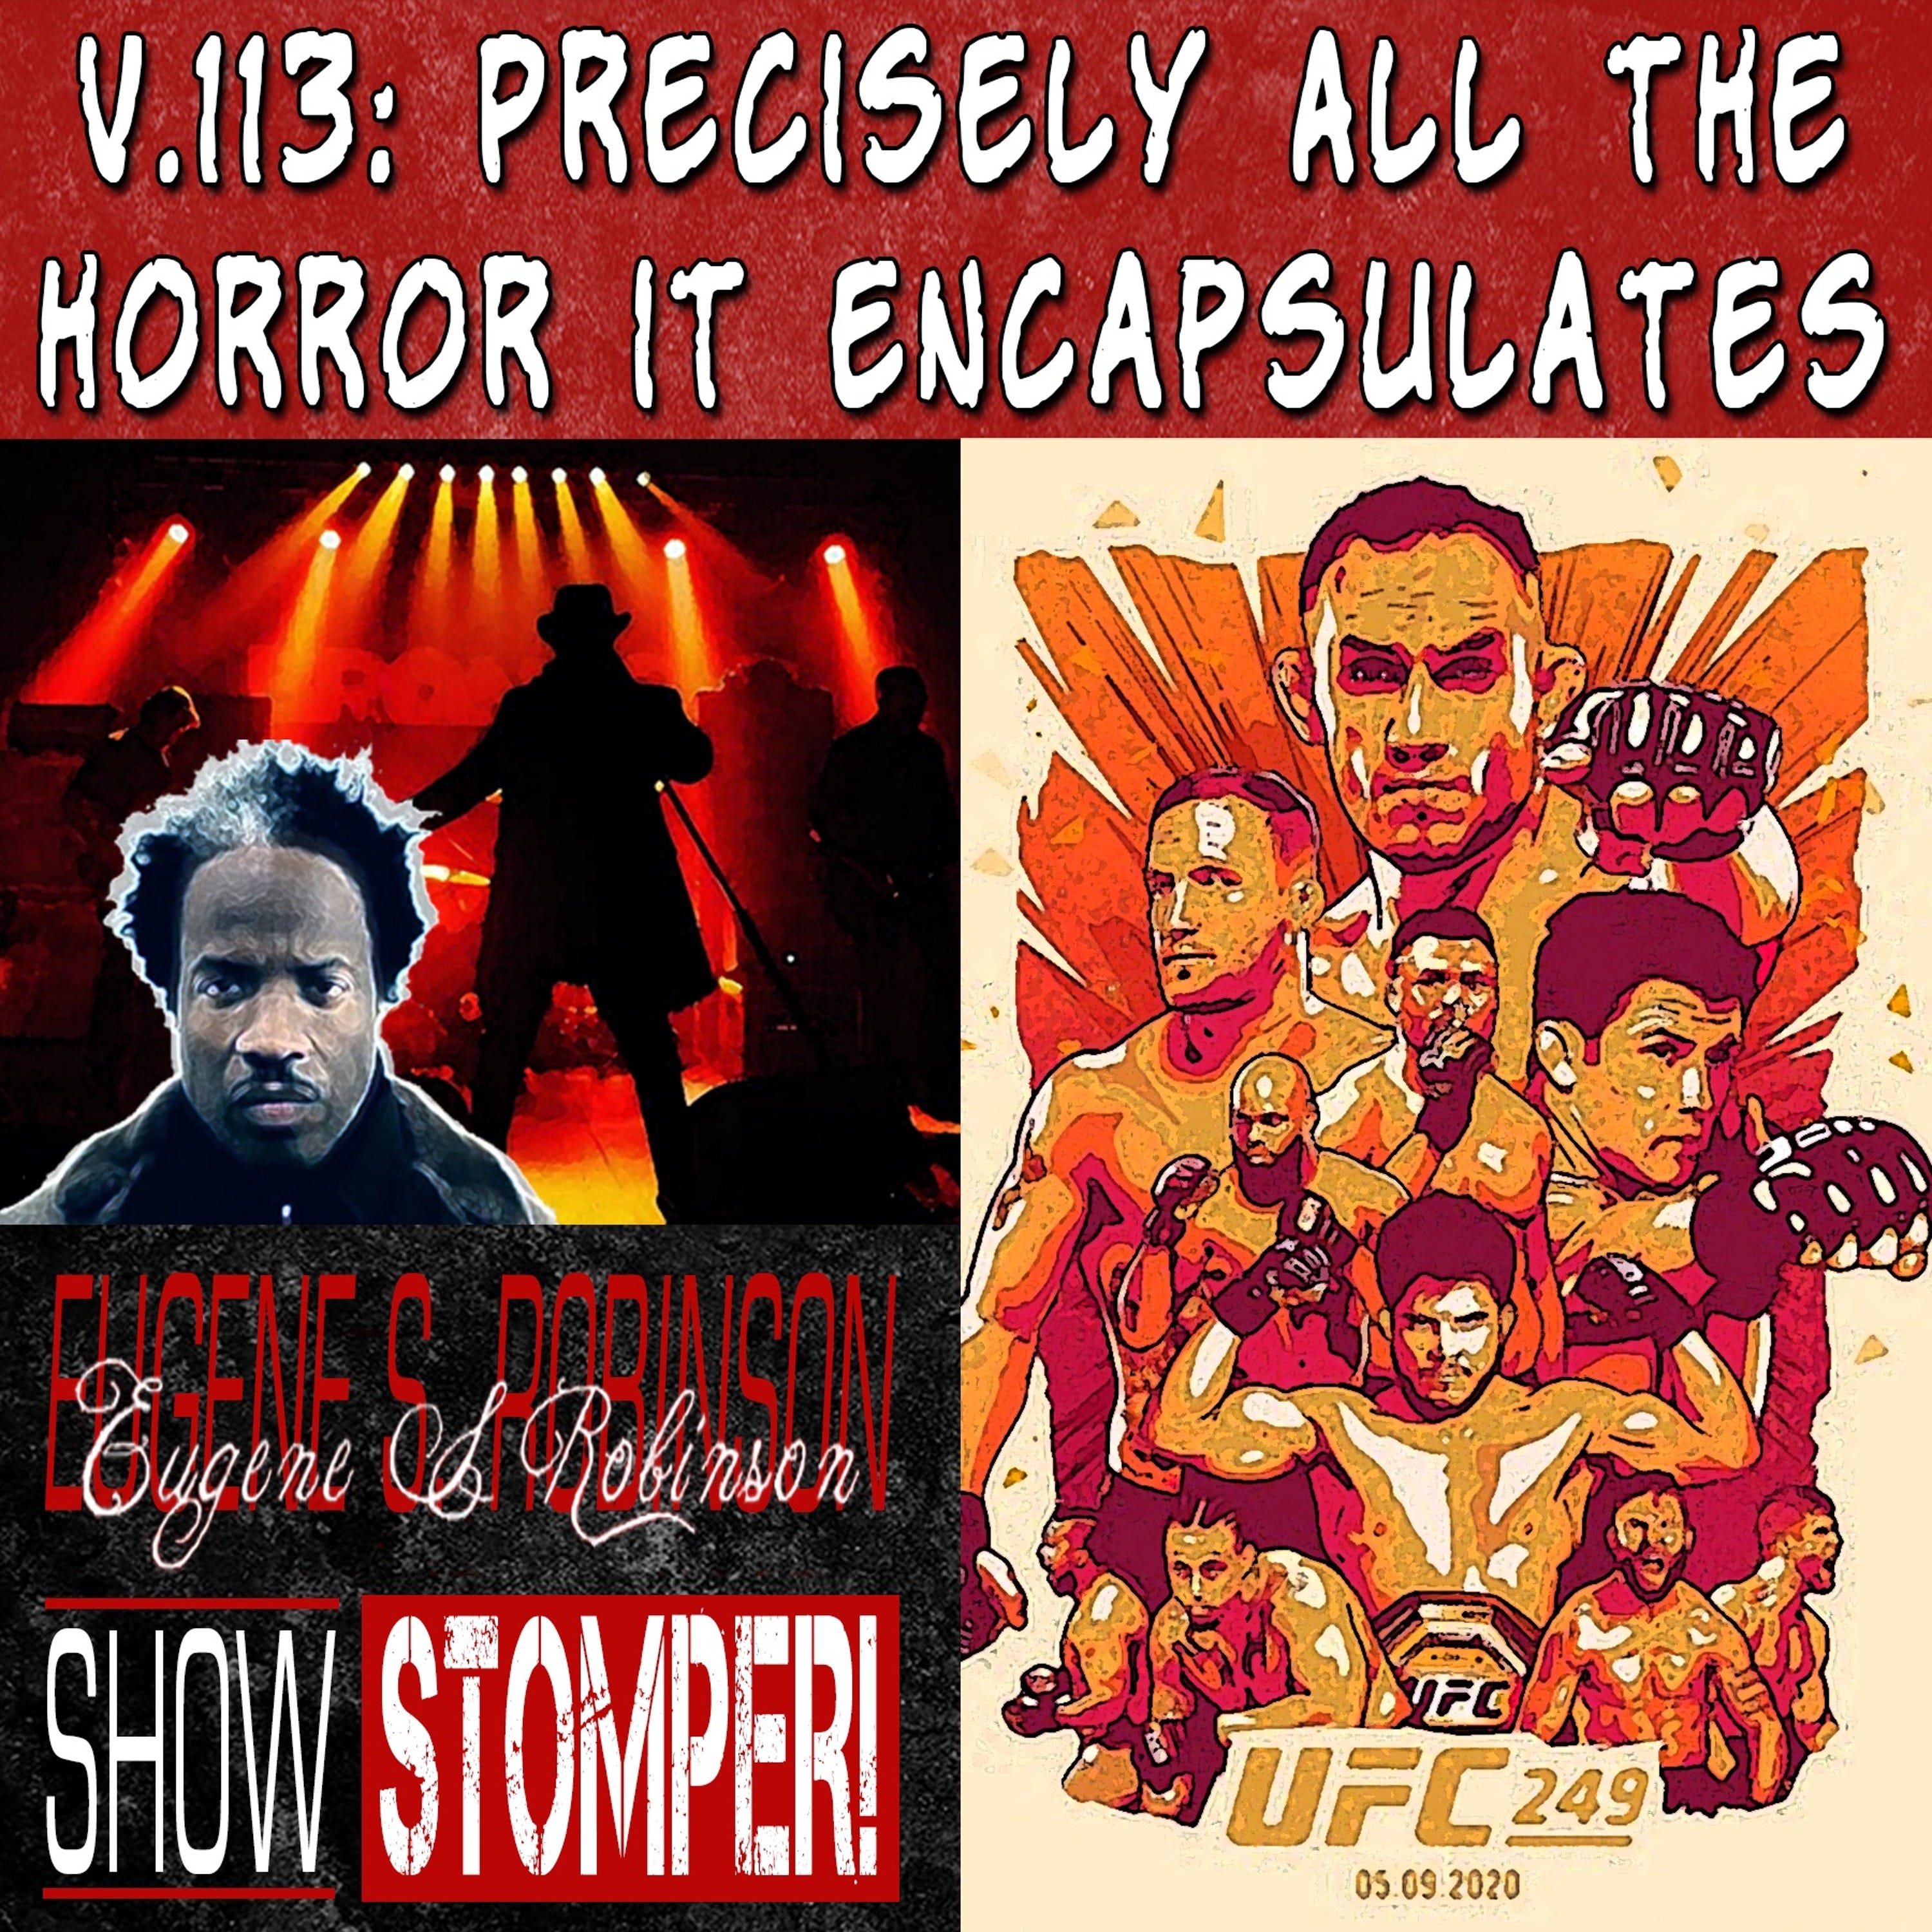 V.113: UFC 249 + Precisely All the Horror It Encapsulates On The Eugene S. Robinson Show Stomper!